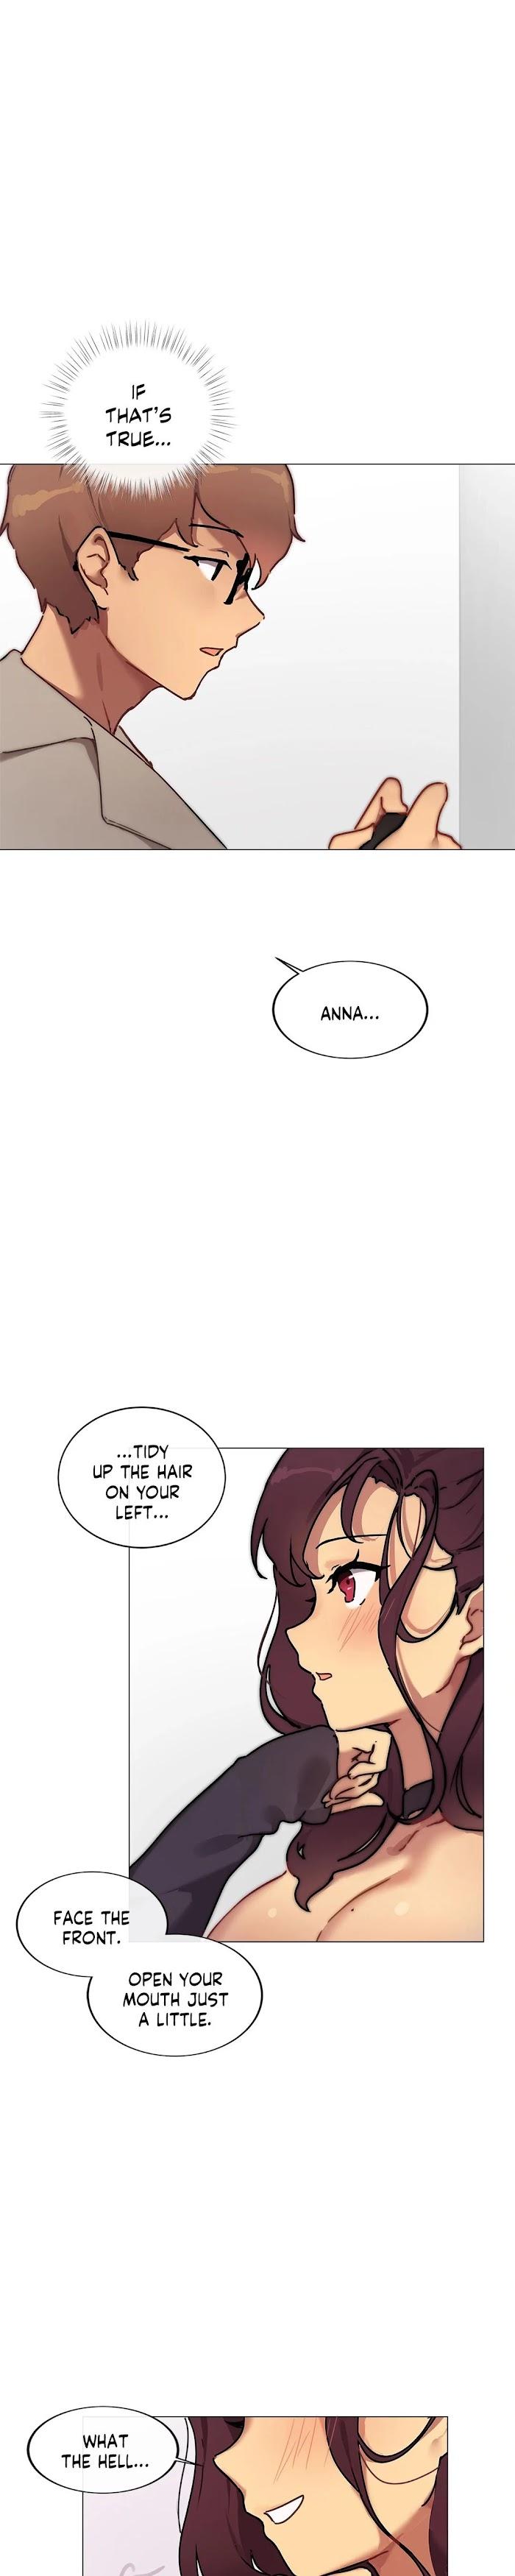 [Dumangoon, 130F] Sexcape Room: Wipe Out Ch.9/9 [English] [Manhwa PDF] Completed 52